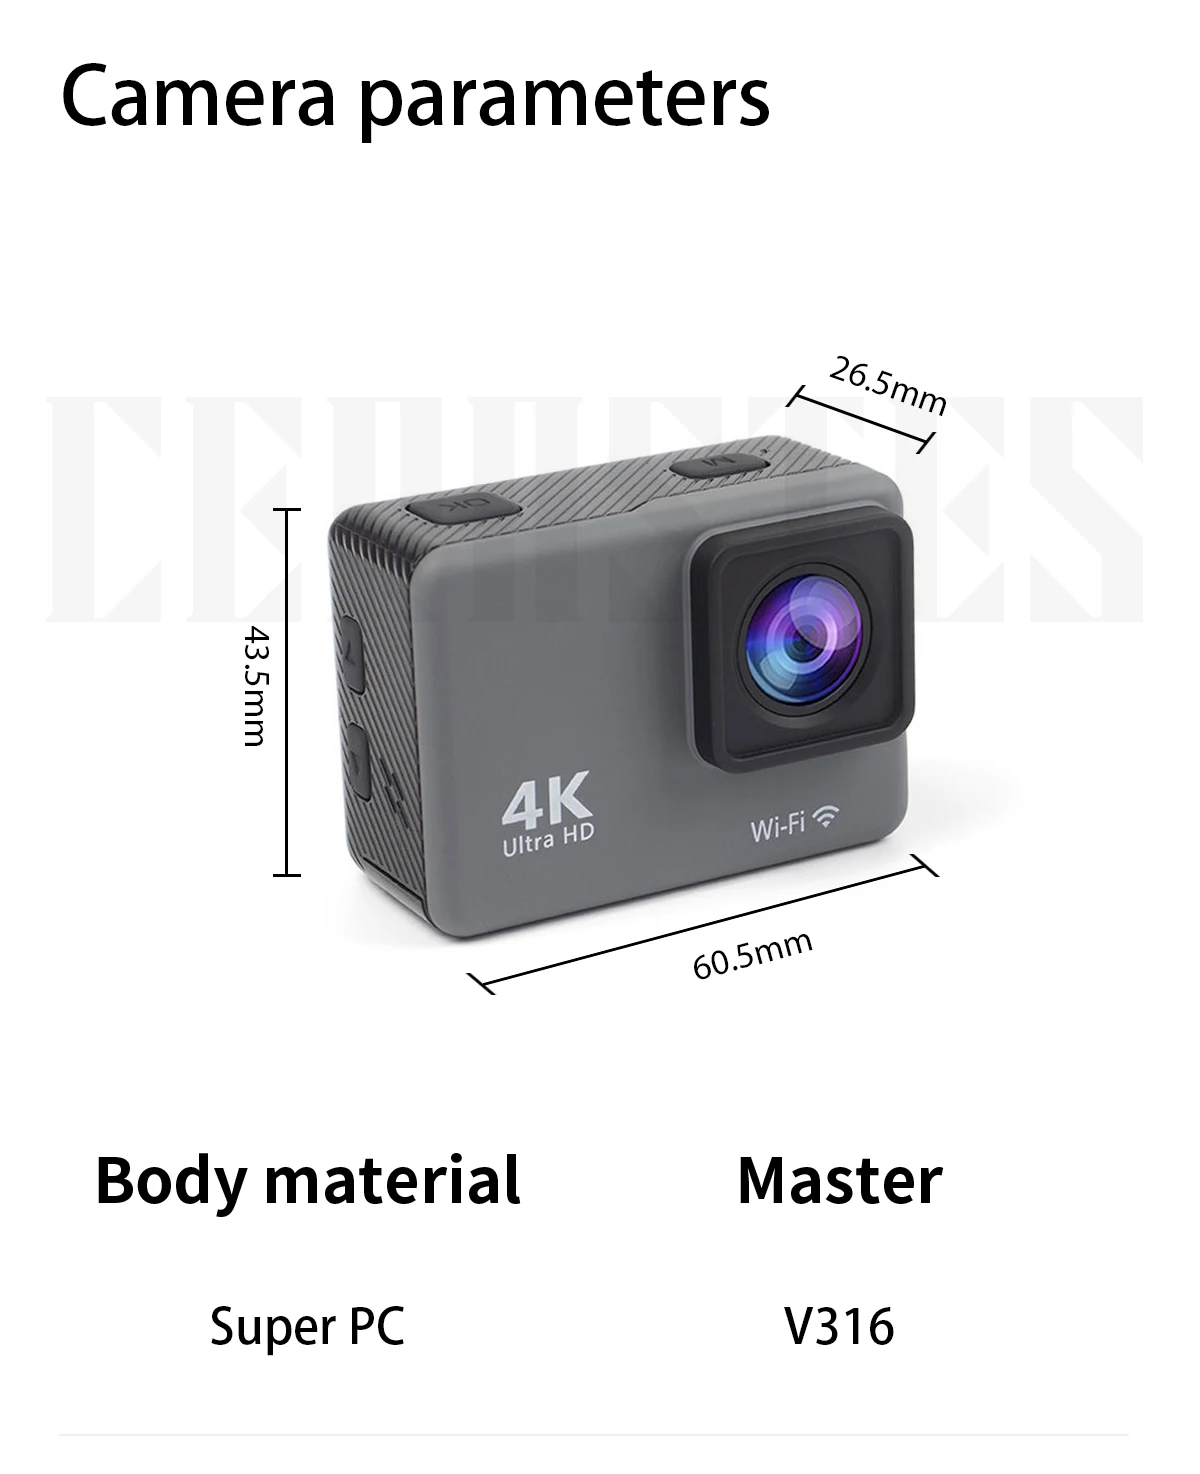 CERASTES Action Camera 4K60FPS with wifi remote control, electronic image stabilization, suitable for diving and outdoor sports.